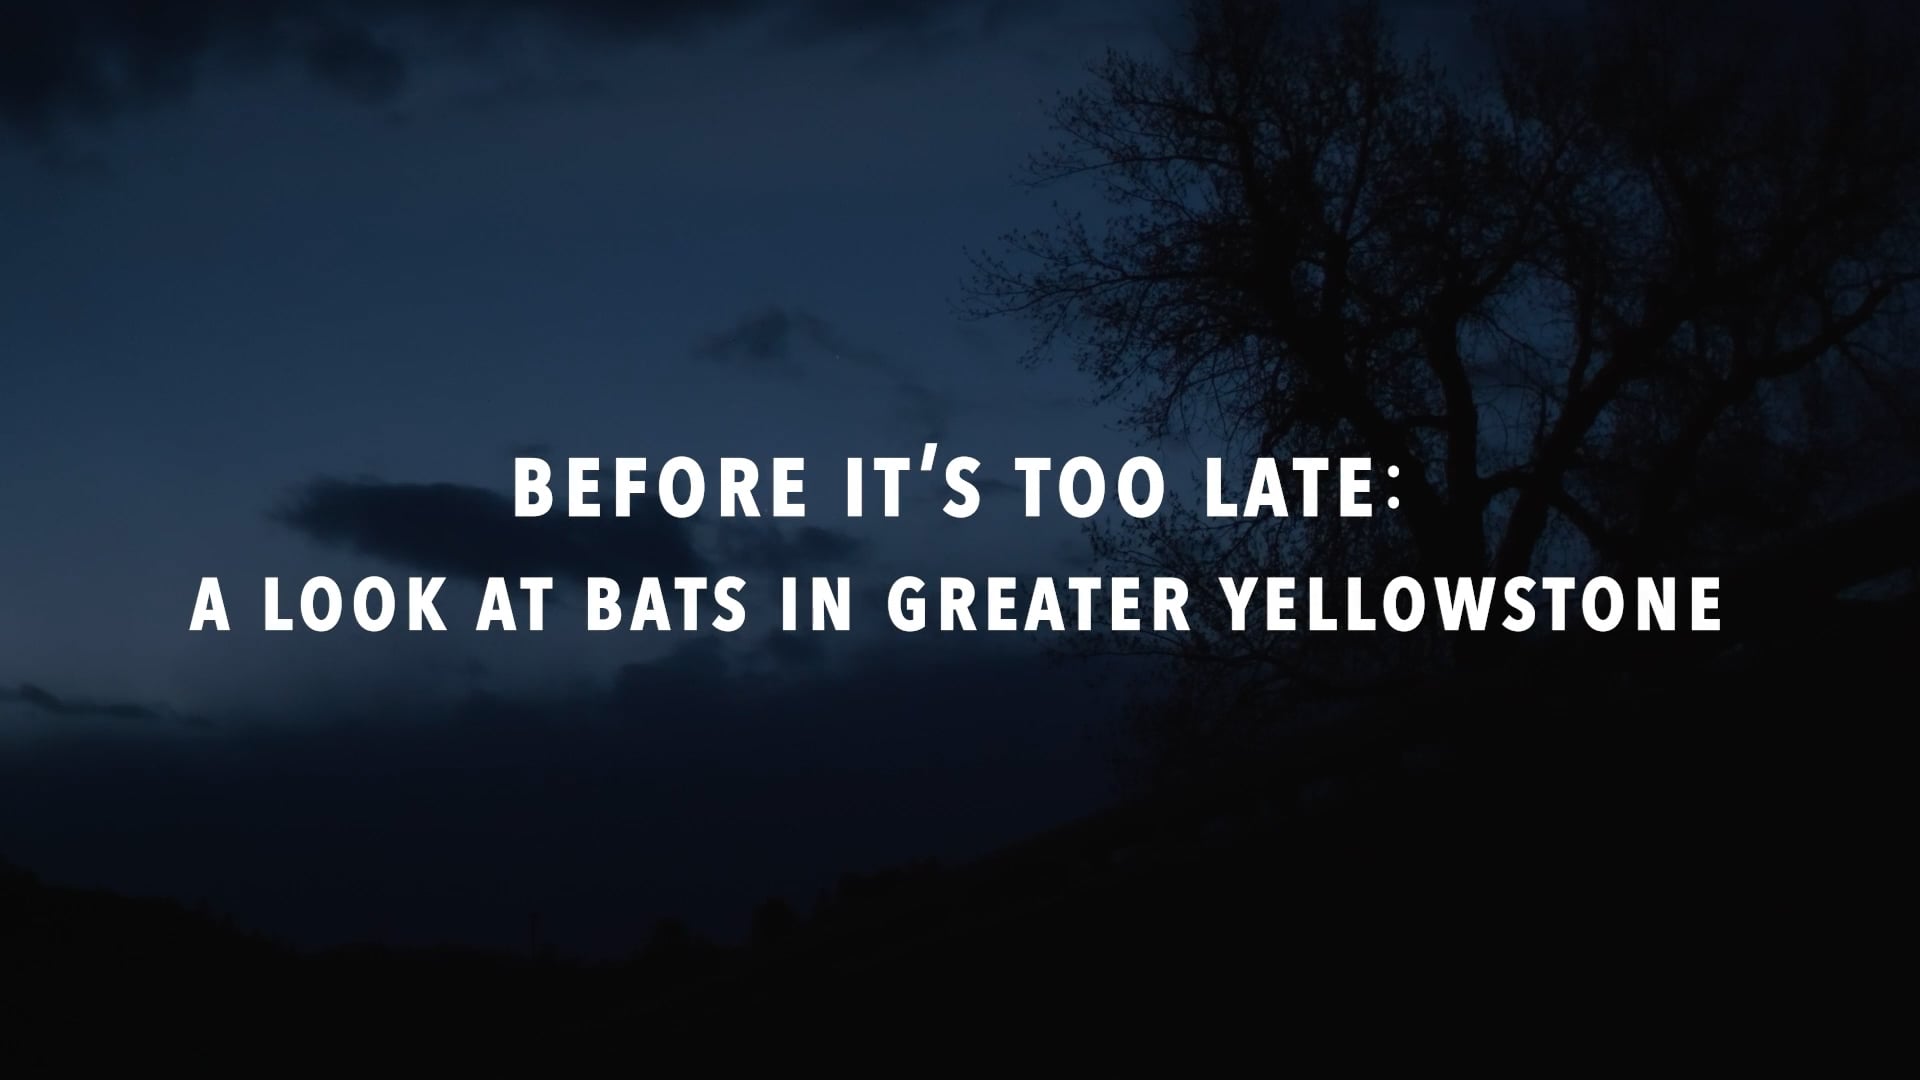 Before It's Too Late: A Look at Bats in Greater Yellowstone